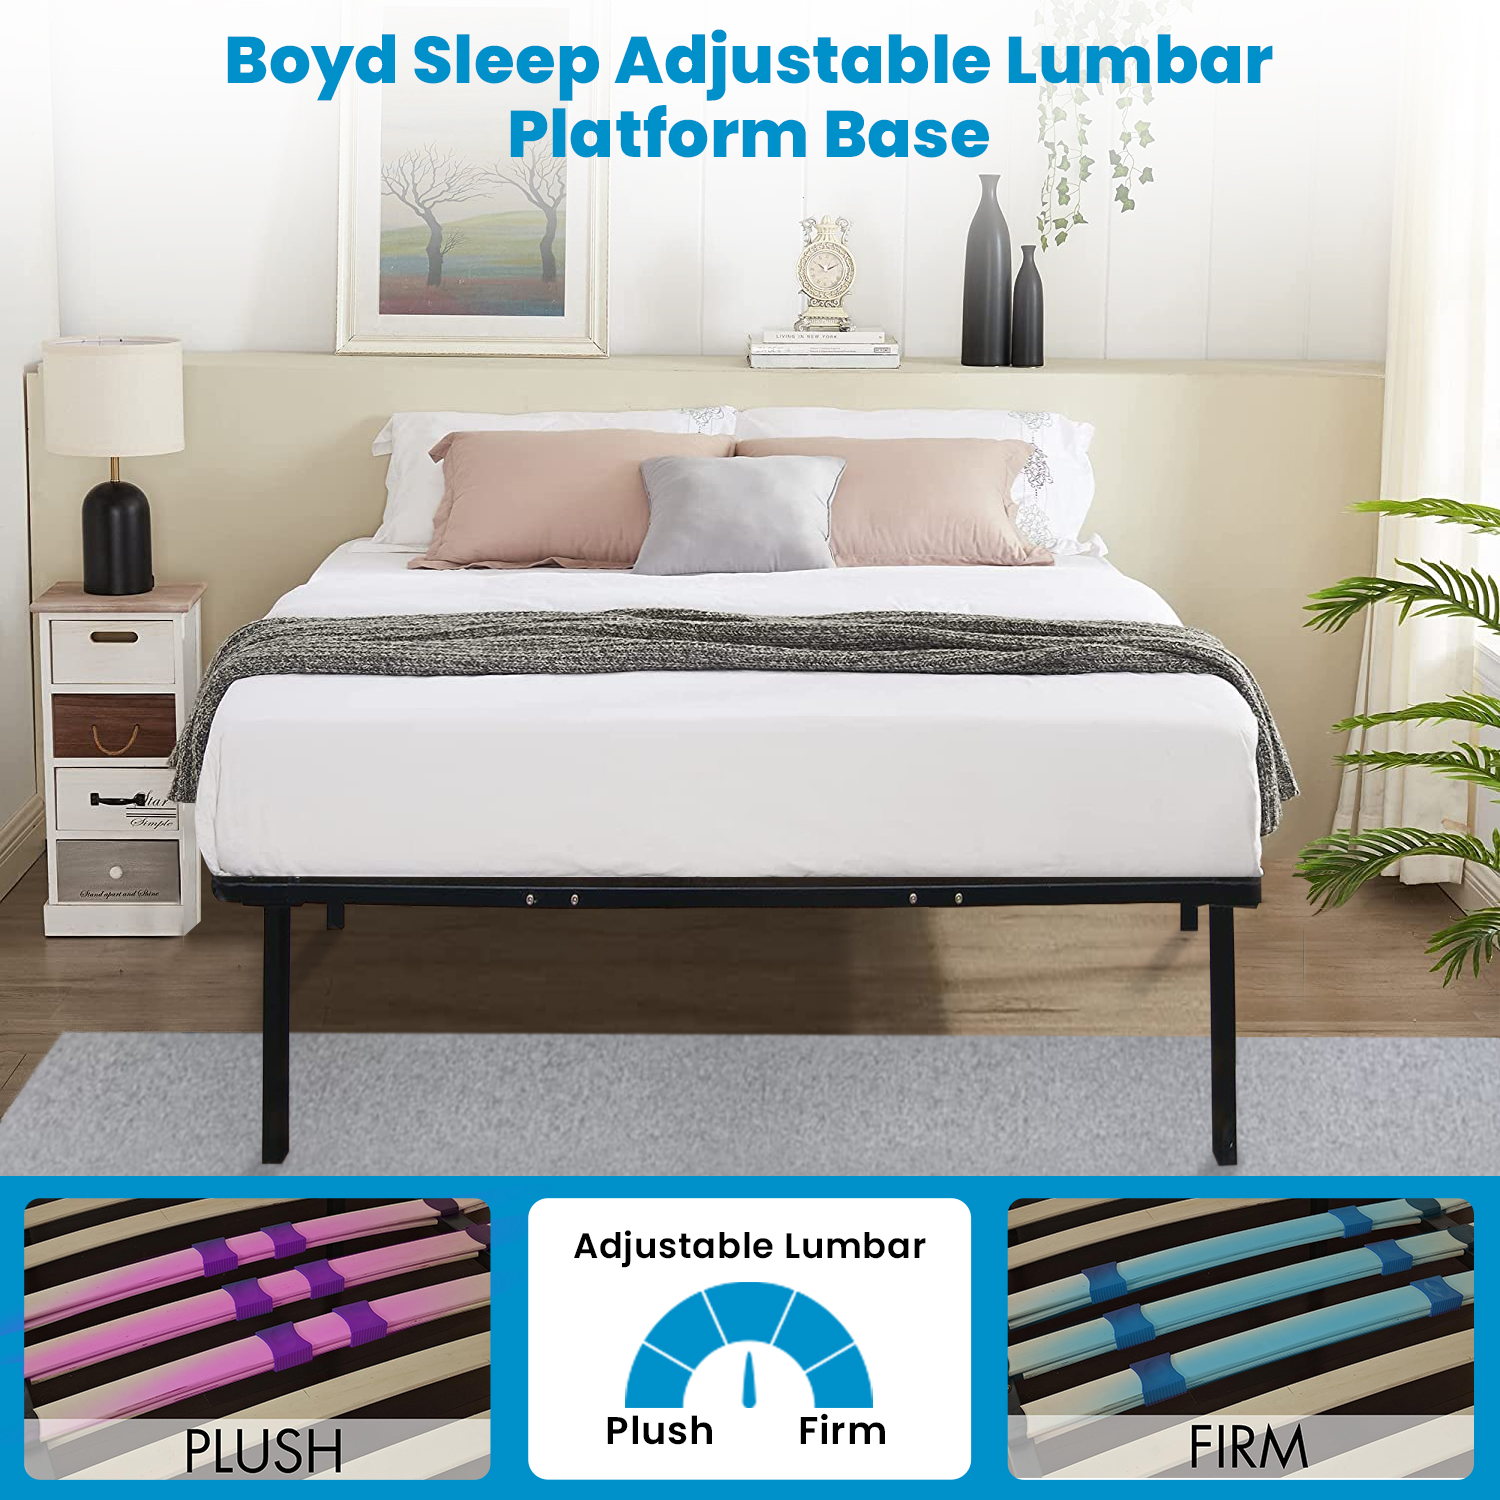 Boyd Sleep 14" Metal Platform Bed Frame with Adjustable Lumbar Support, Tool-Free Assembly, Queen - image 3 of 13